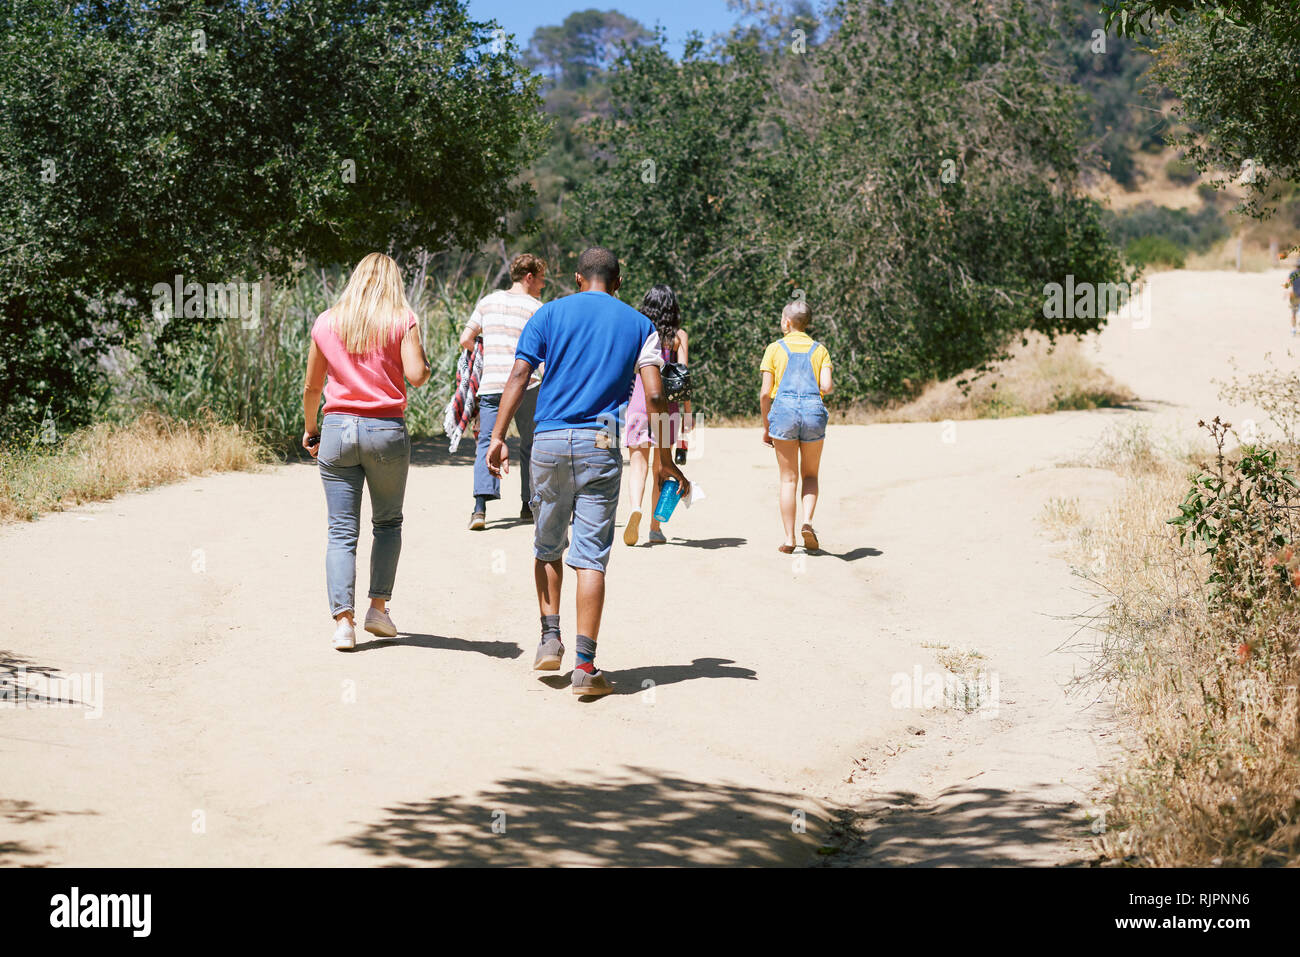 Five young adult friends walking in park, rear view, Los Angeles, California, USA Stock Photo